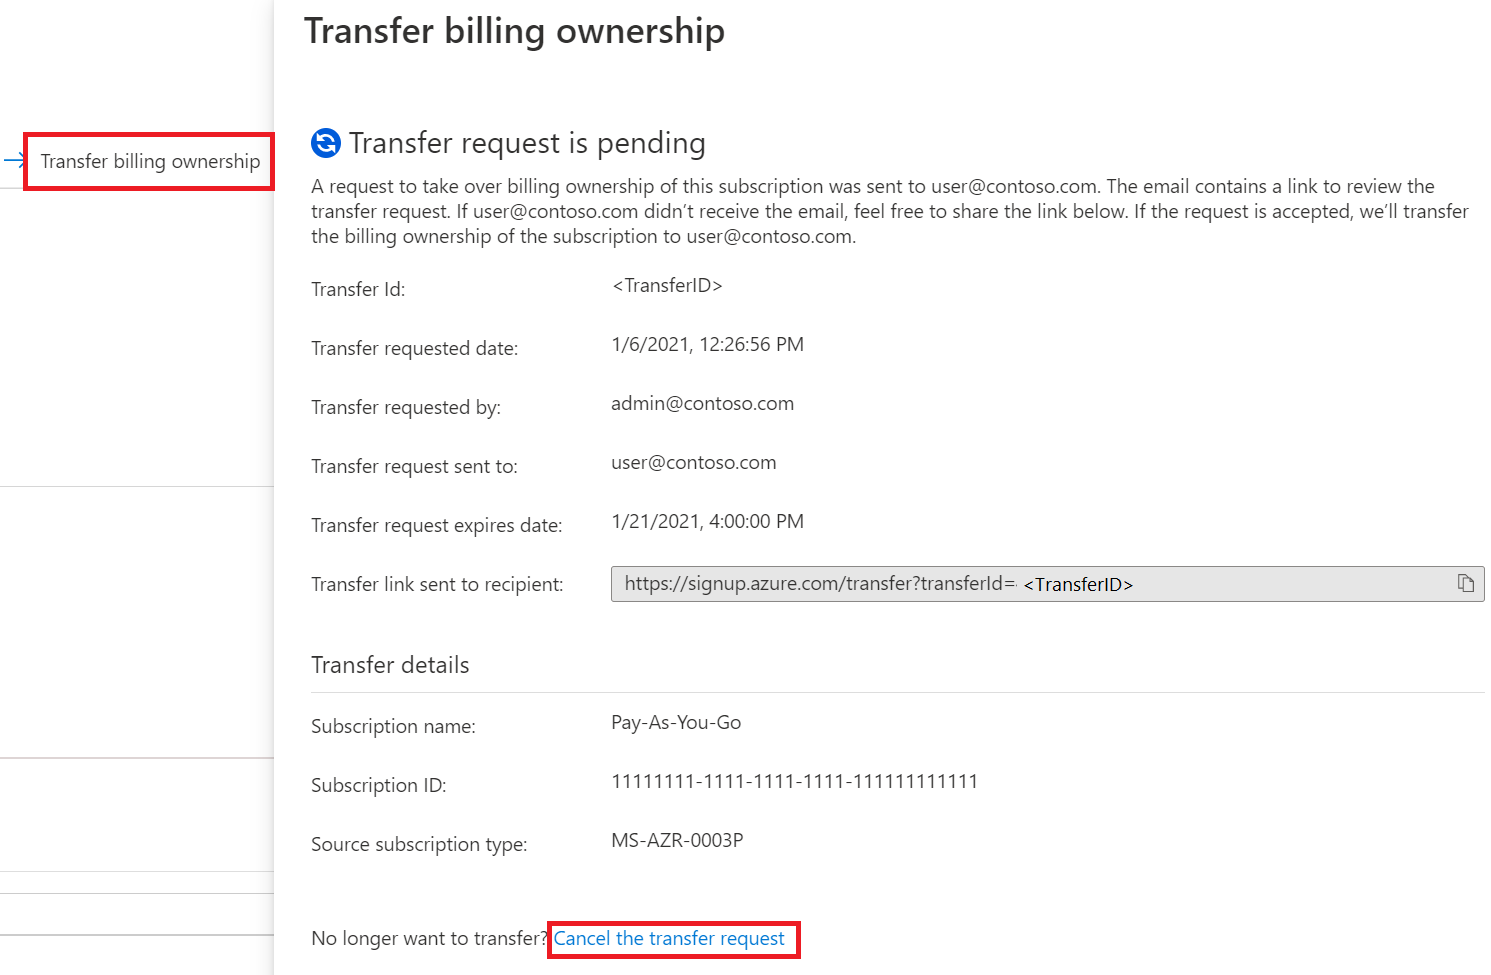 Example showing the Transfer billing ownership window with the Cancel the transfer request option